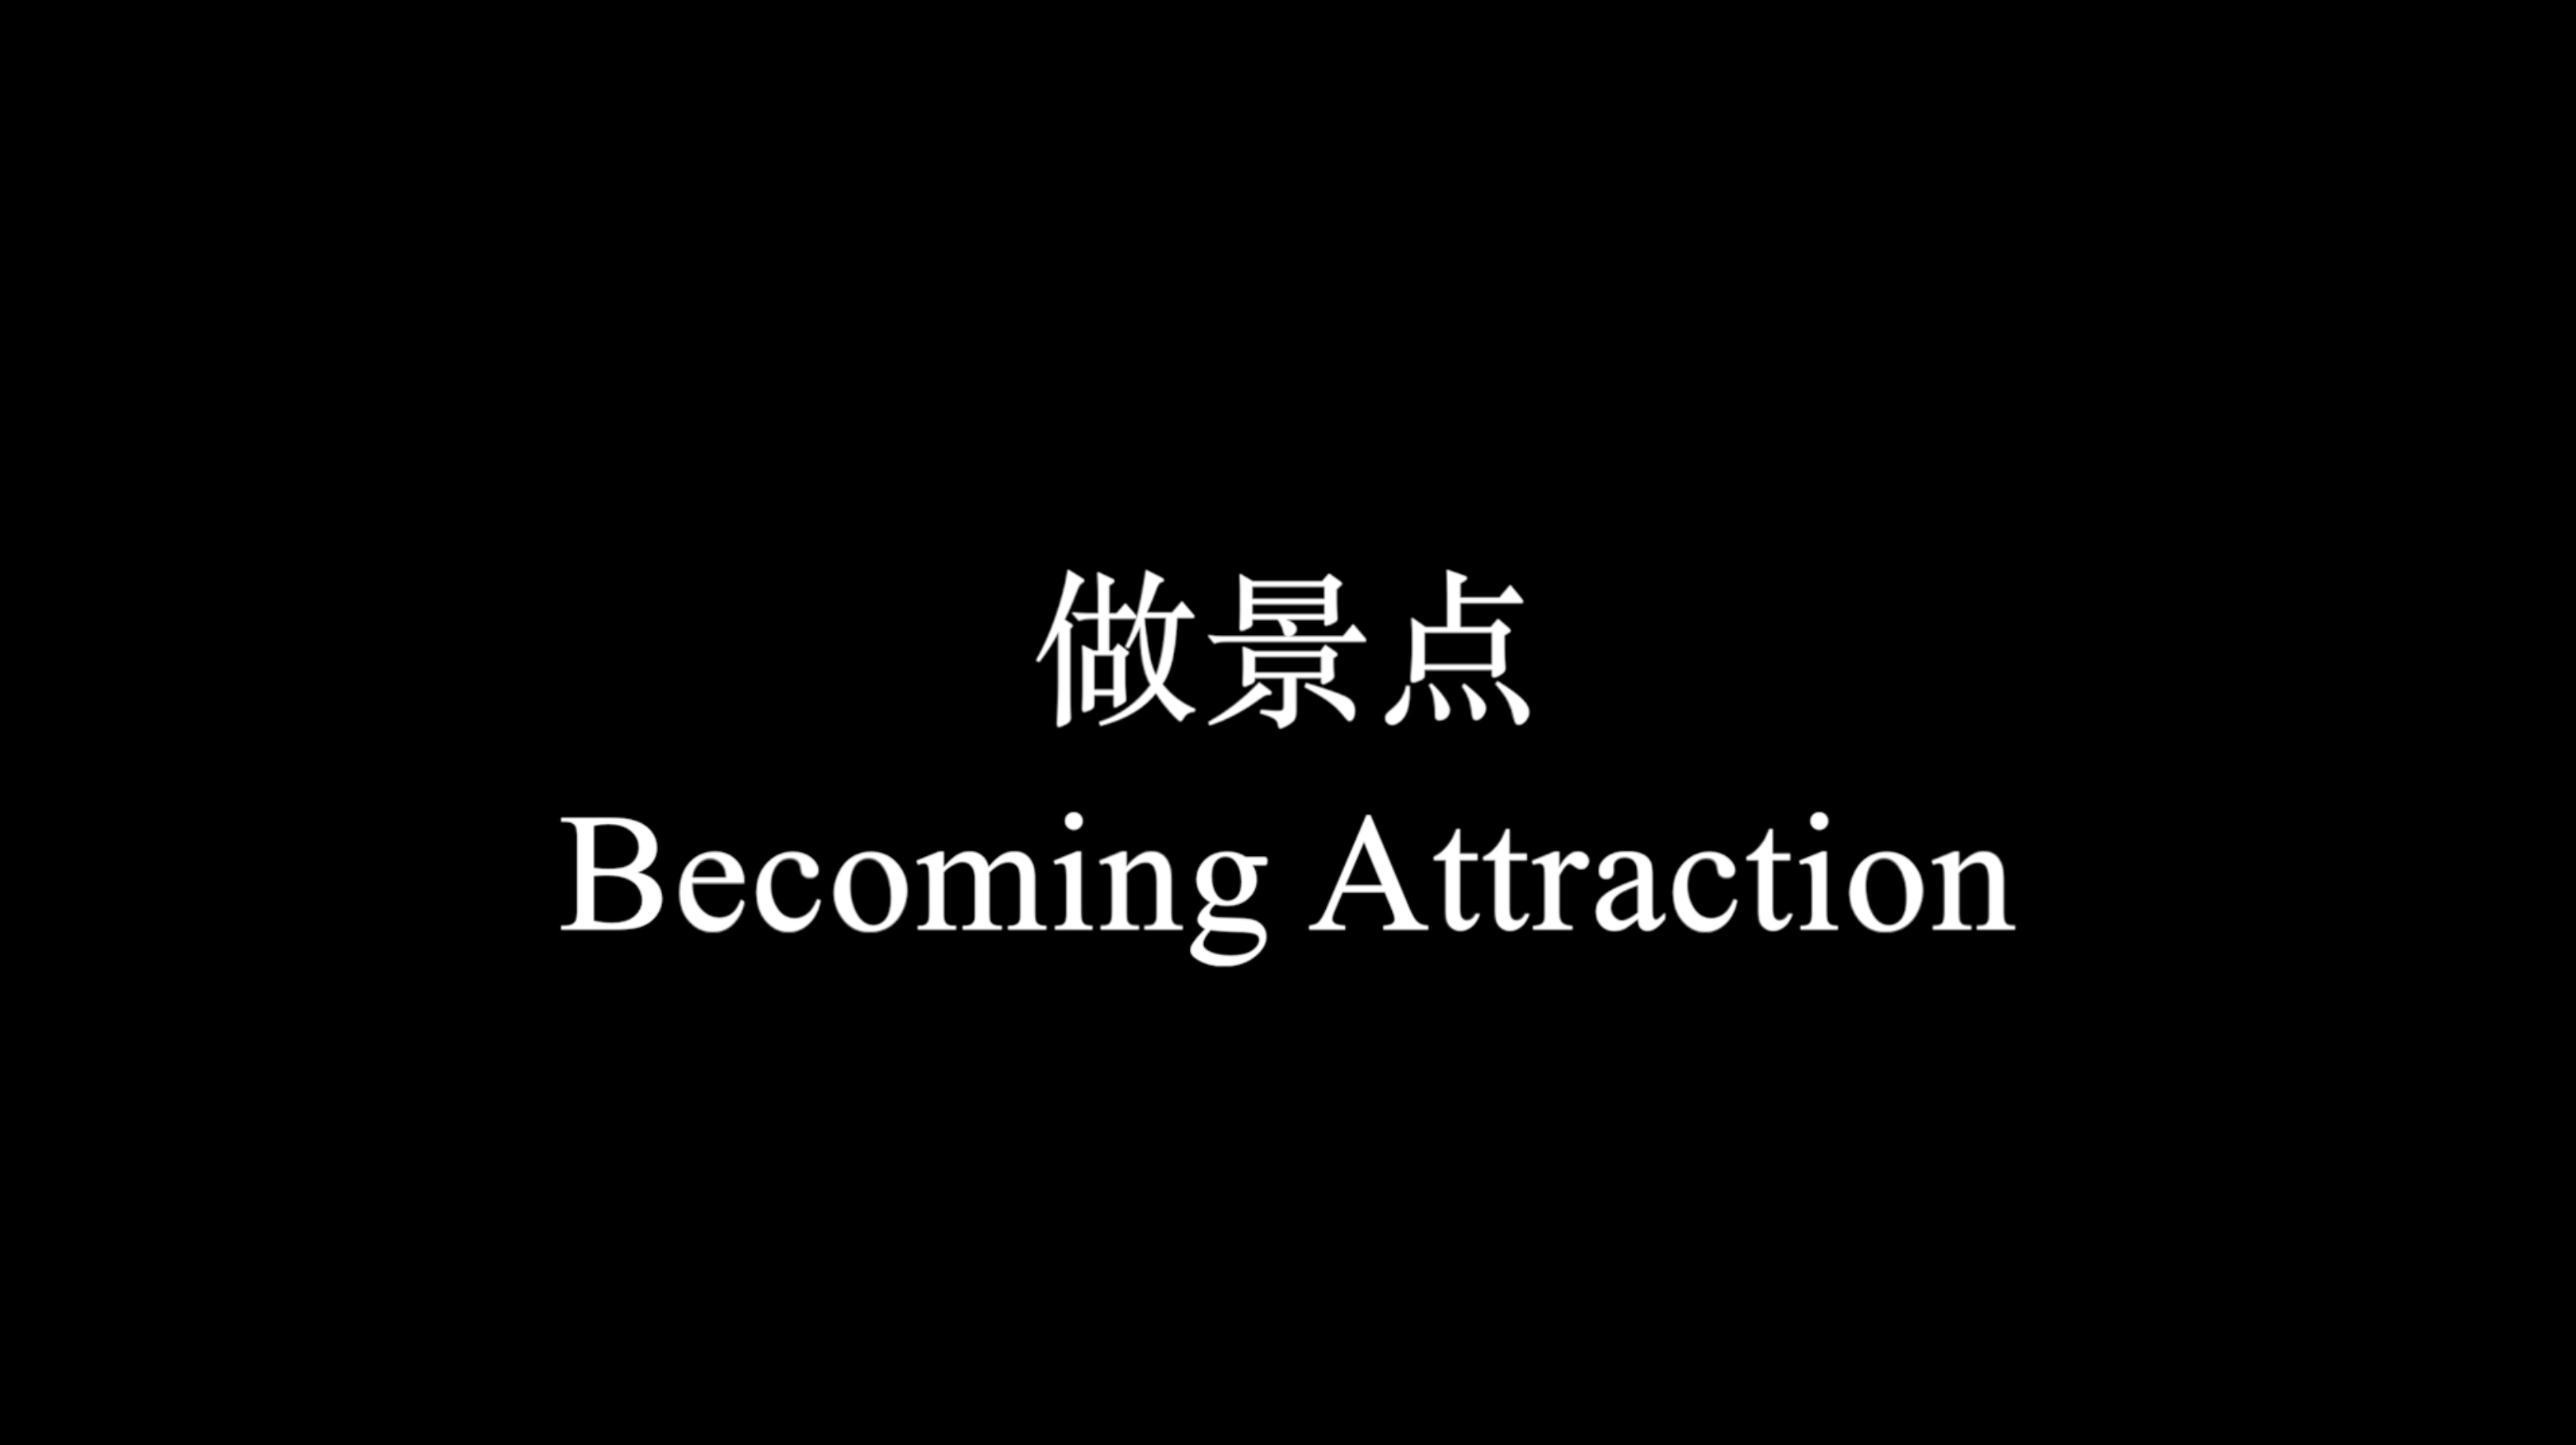 Becoming Attraction: Stories about The House of Cai